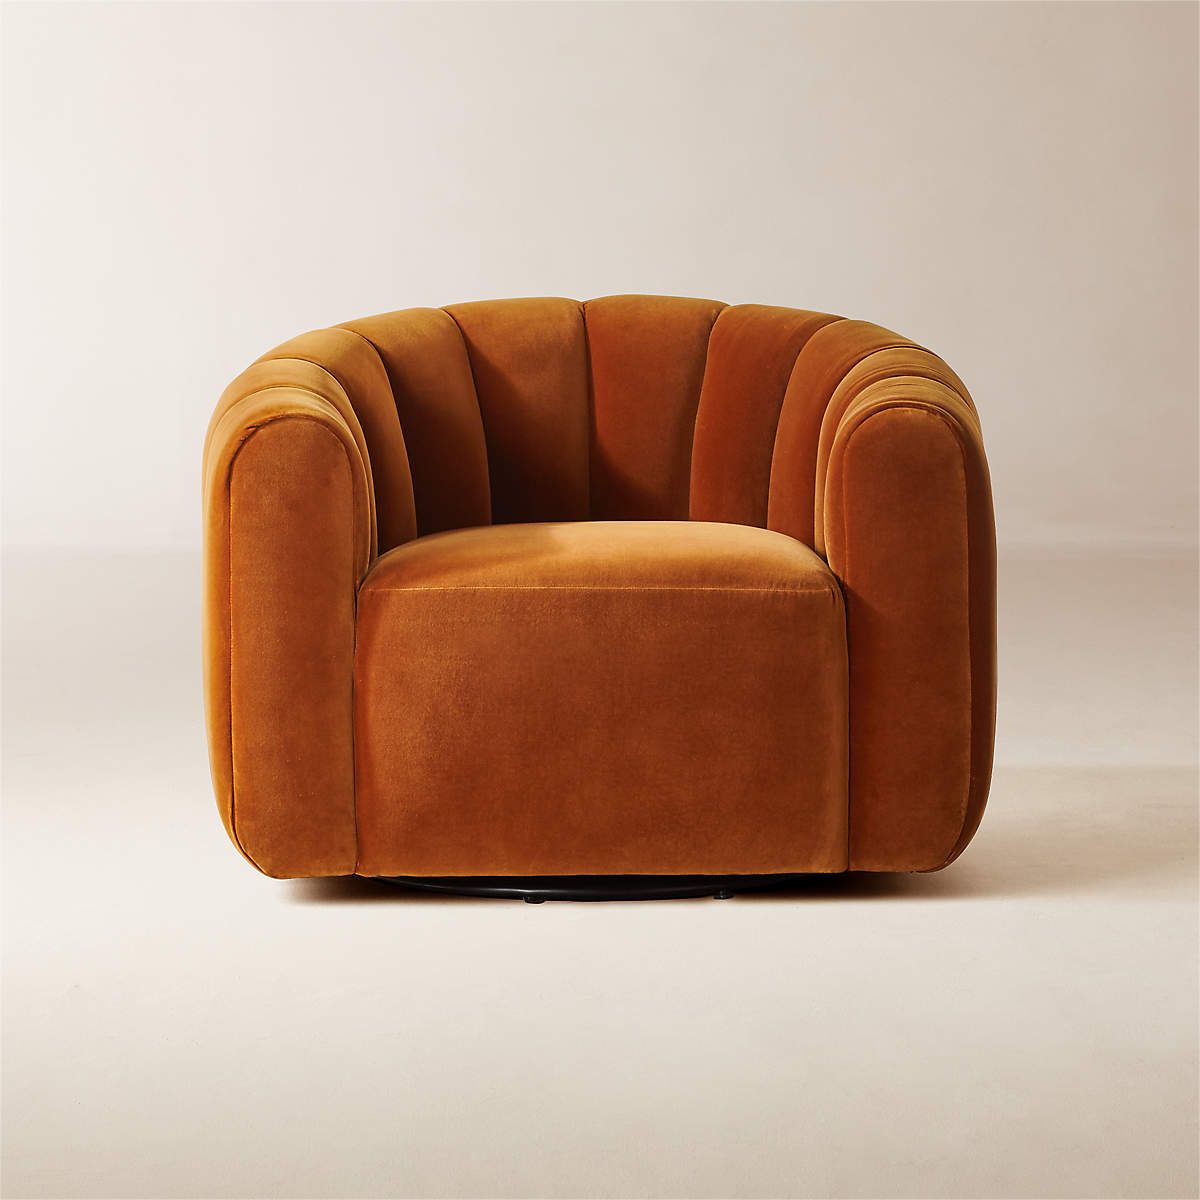 The Versatile Appeal of Contemporary Swivel Chairs for the Living Room